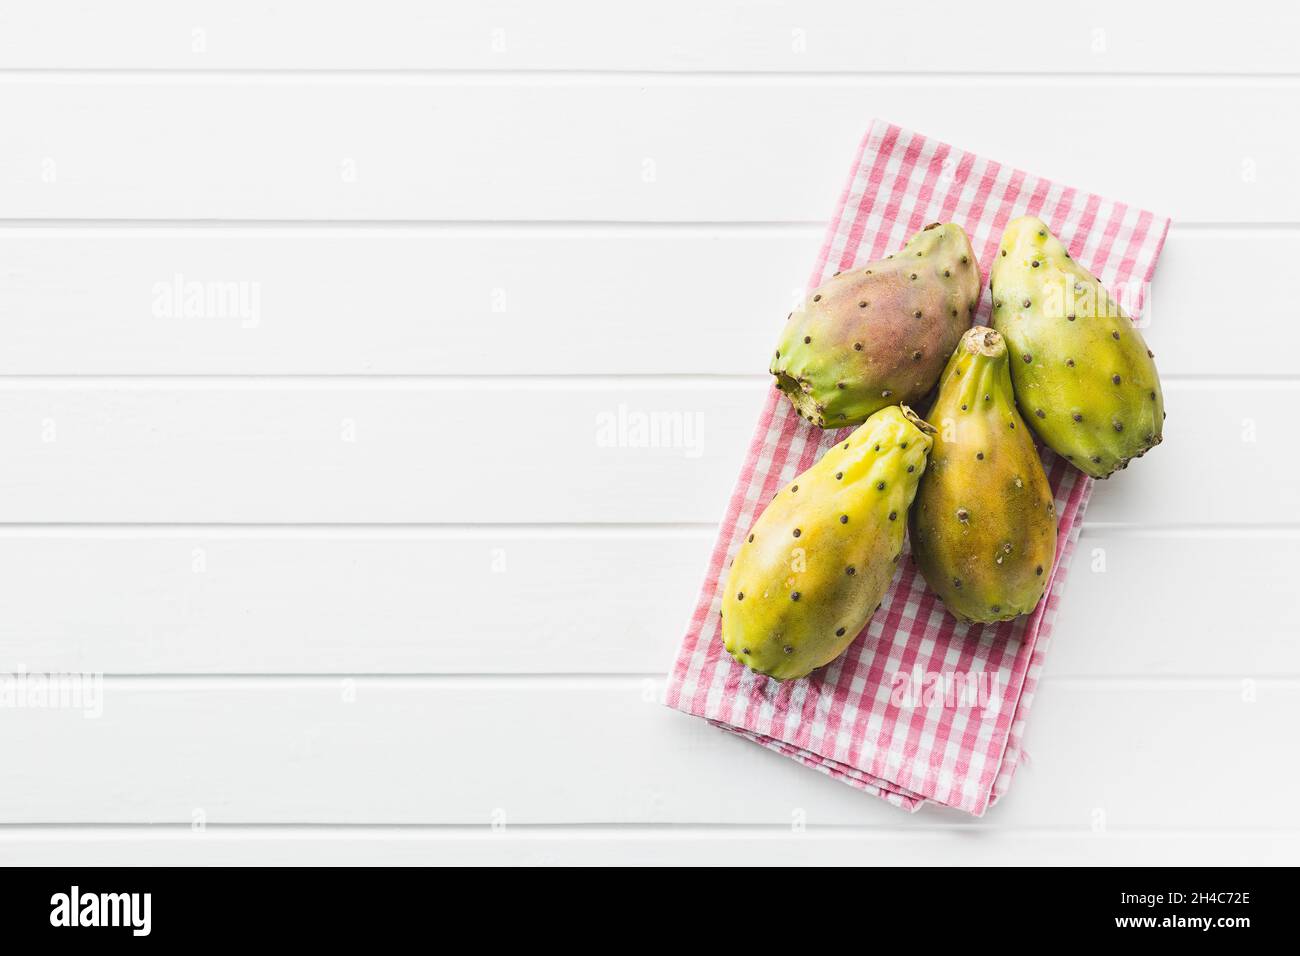 Raw prickly pears. Opuntia or indian fig cactus on white table. Top view. Stock Photo